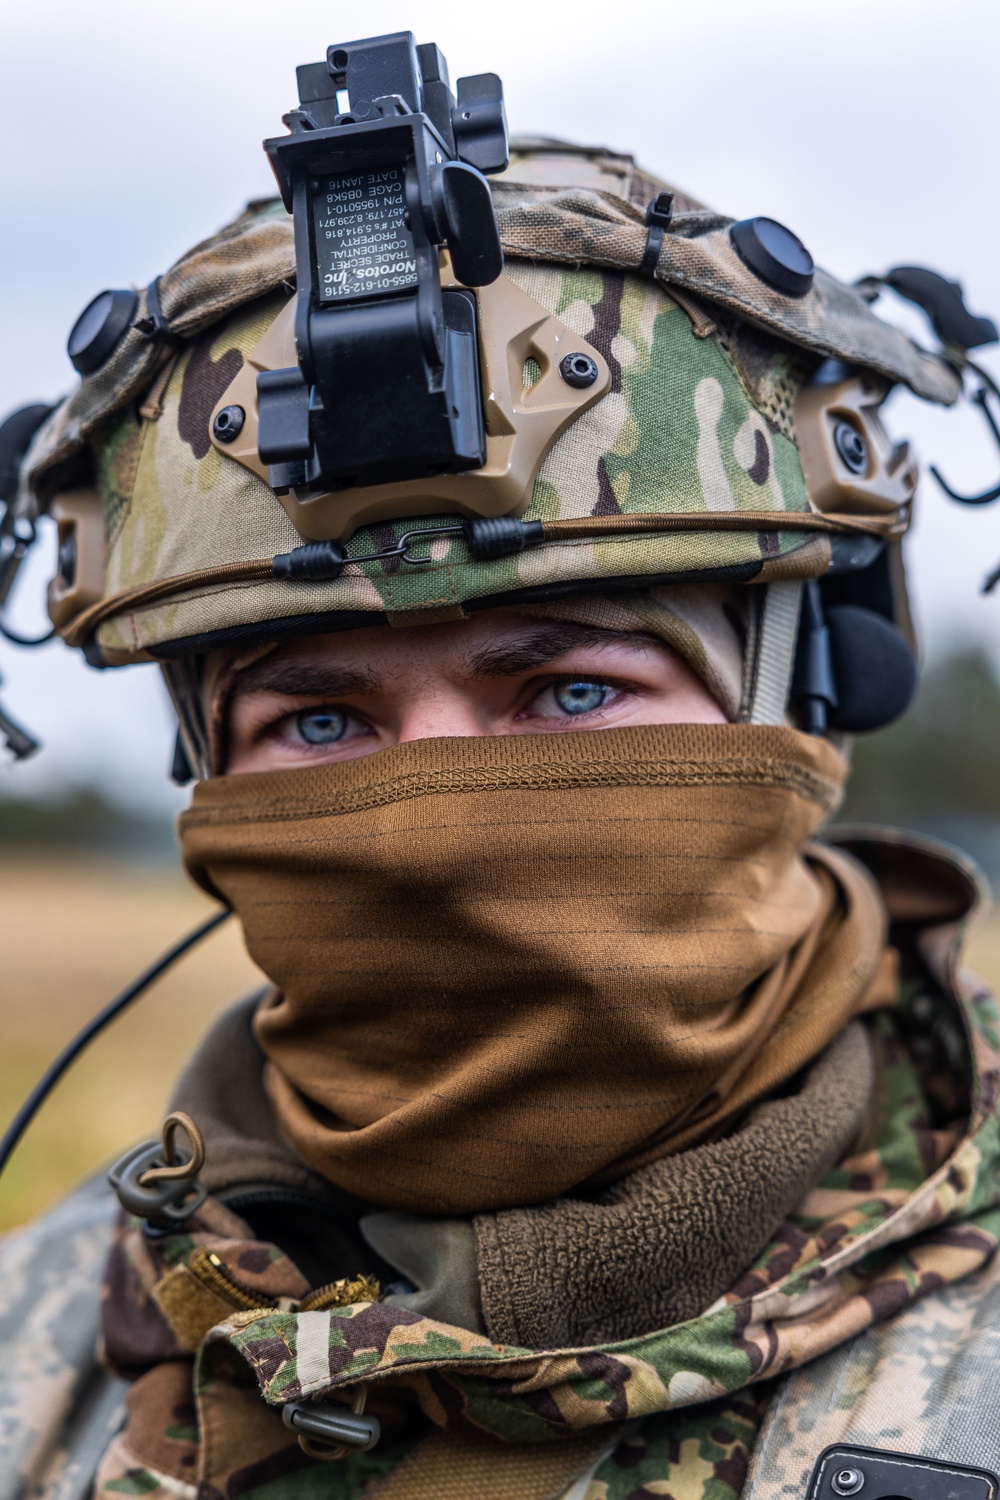 Ukrainian Special Forces at Combined Resolve 16